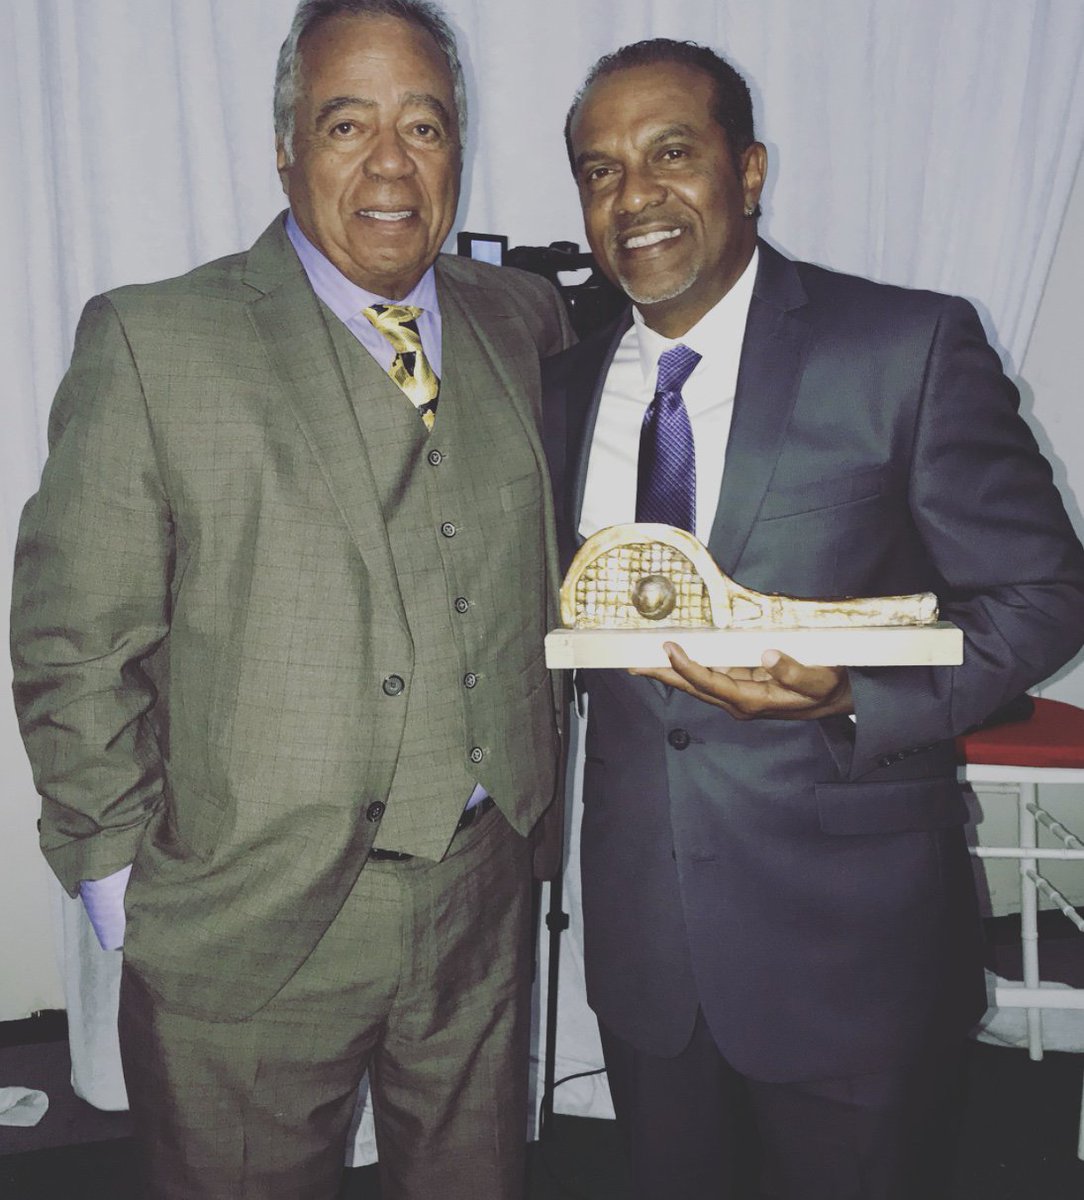 Grateful to have been inducted into the Black Tennis Hall of Fame in a ceremony that was held at George Washington University.  It is an honor and a privilege. Thanks to Bob Davis, president of the BTHF and the American Tennis Association. 
#ronaldagenor #tennis #blacktennis